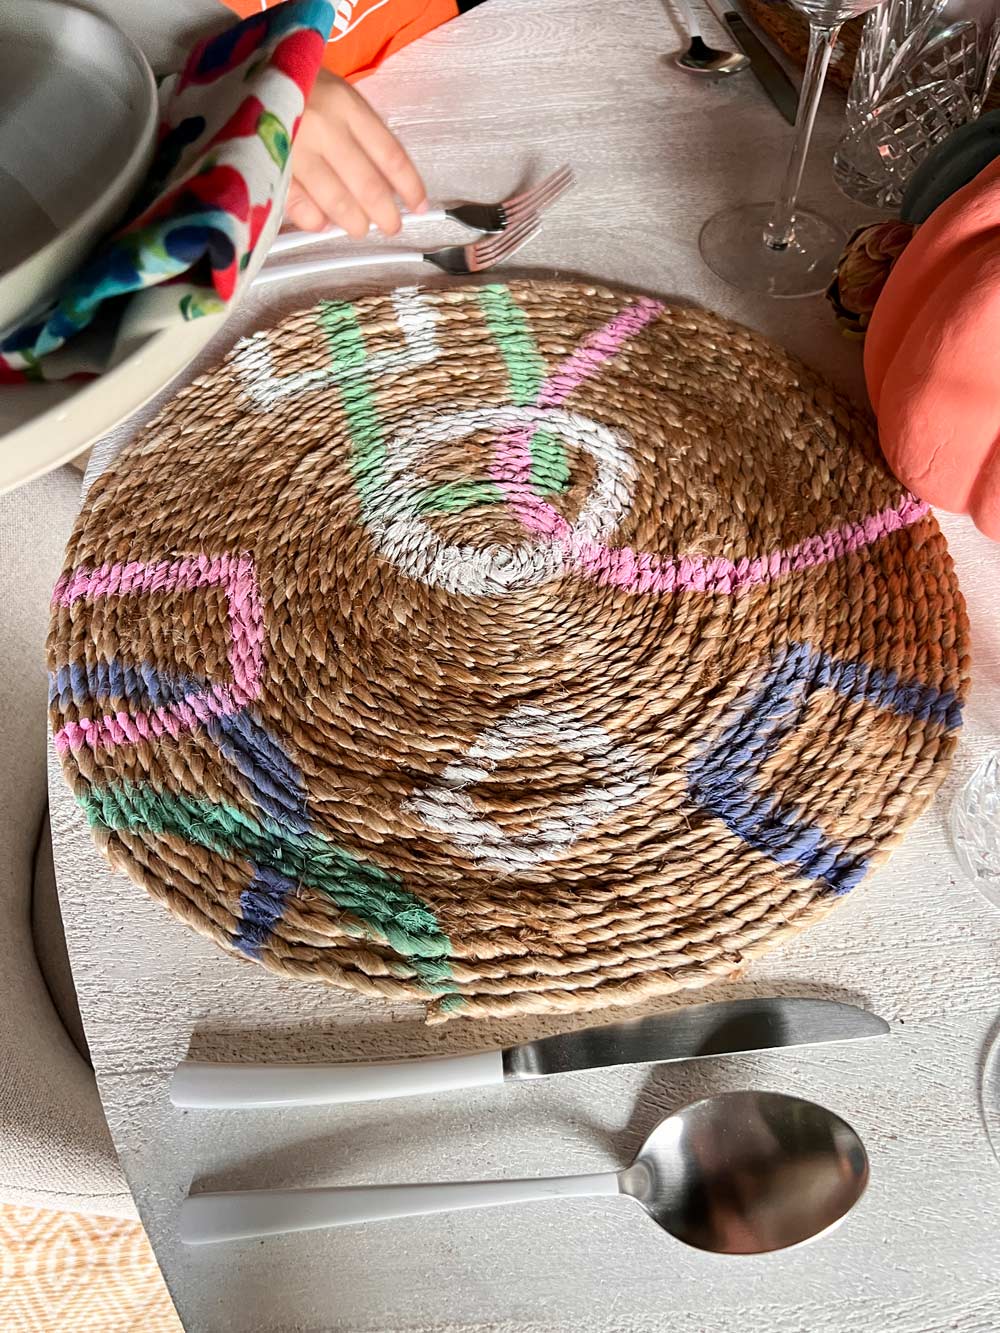 A person setting the table with the painted placemats.